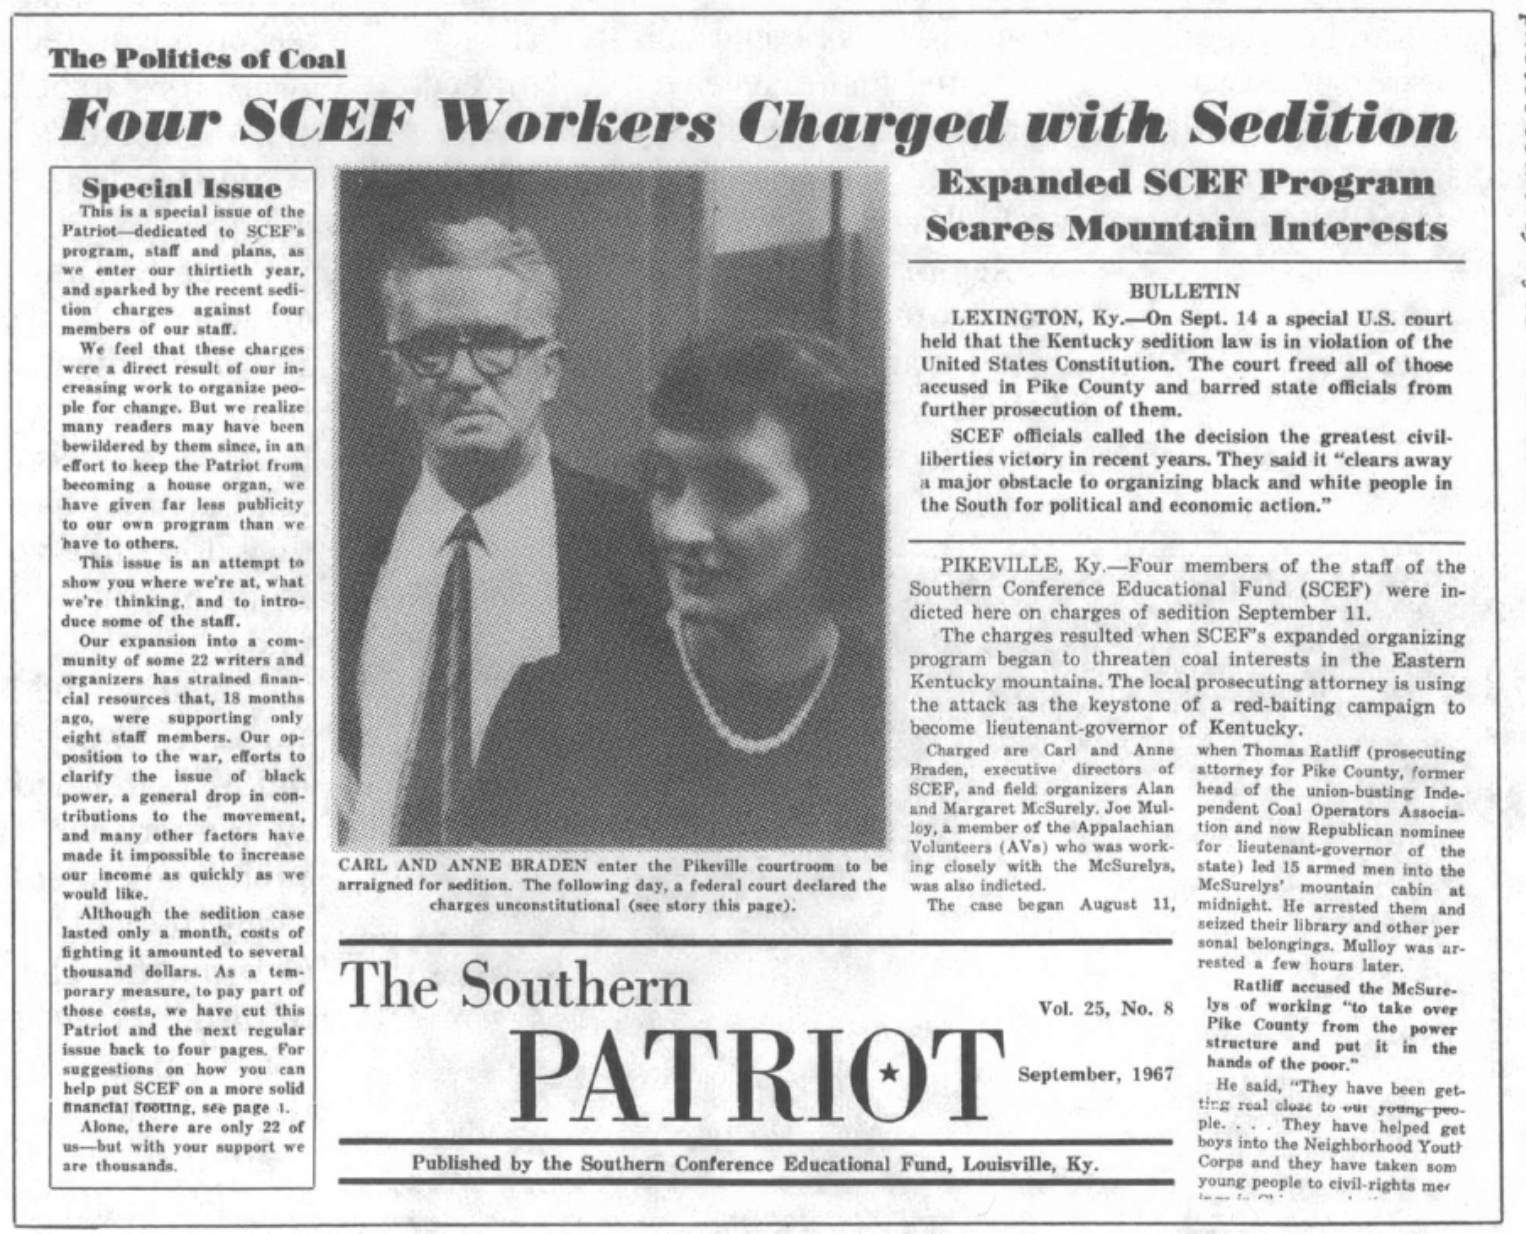 news clipping of four SCEF workers charged with sedition